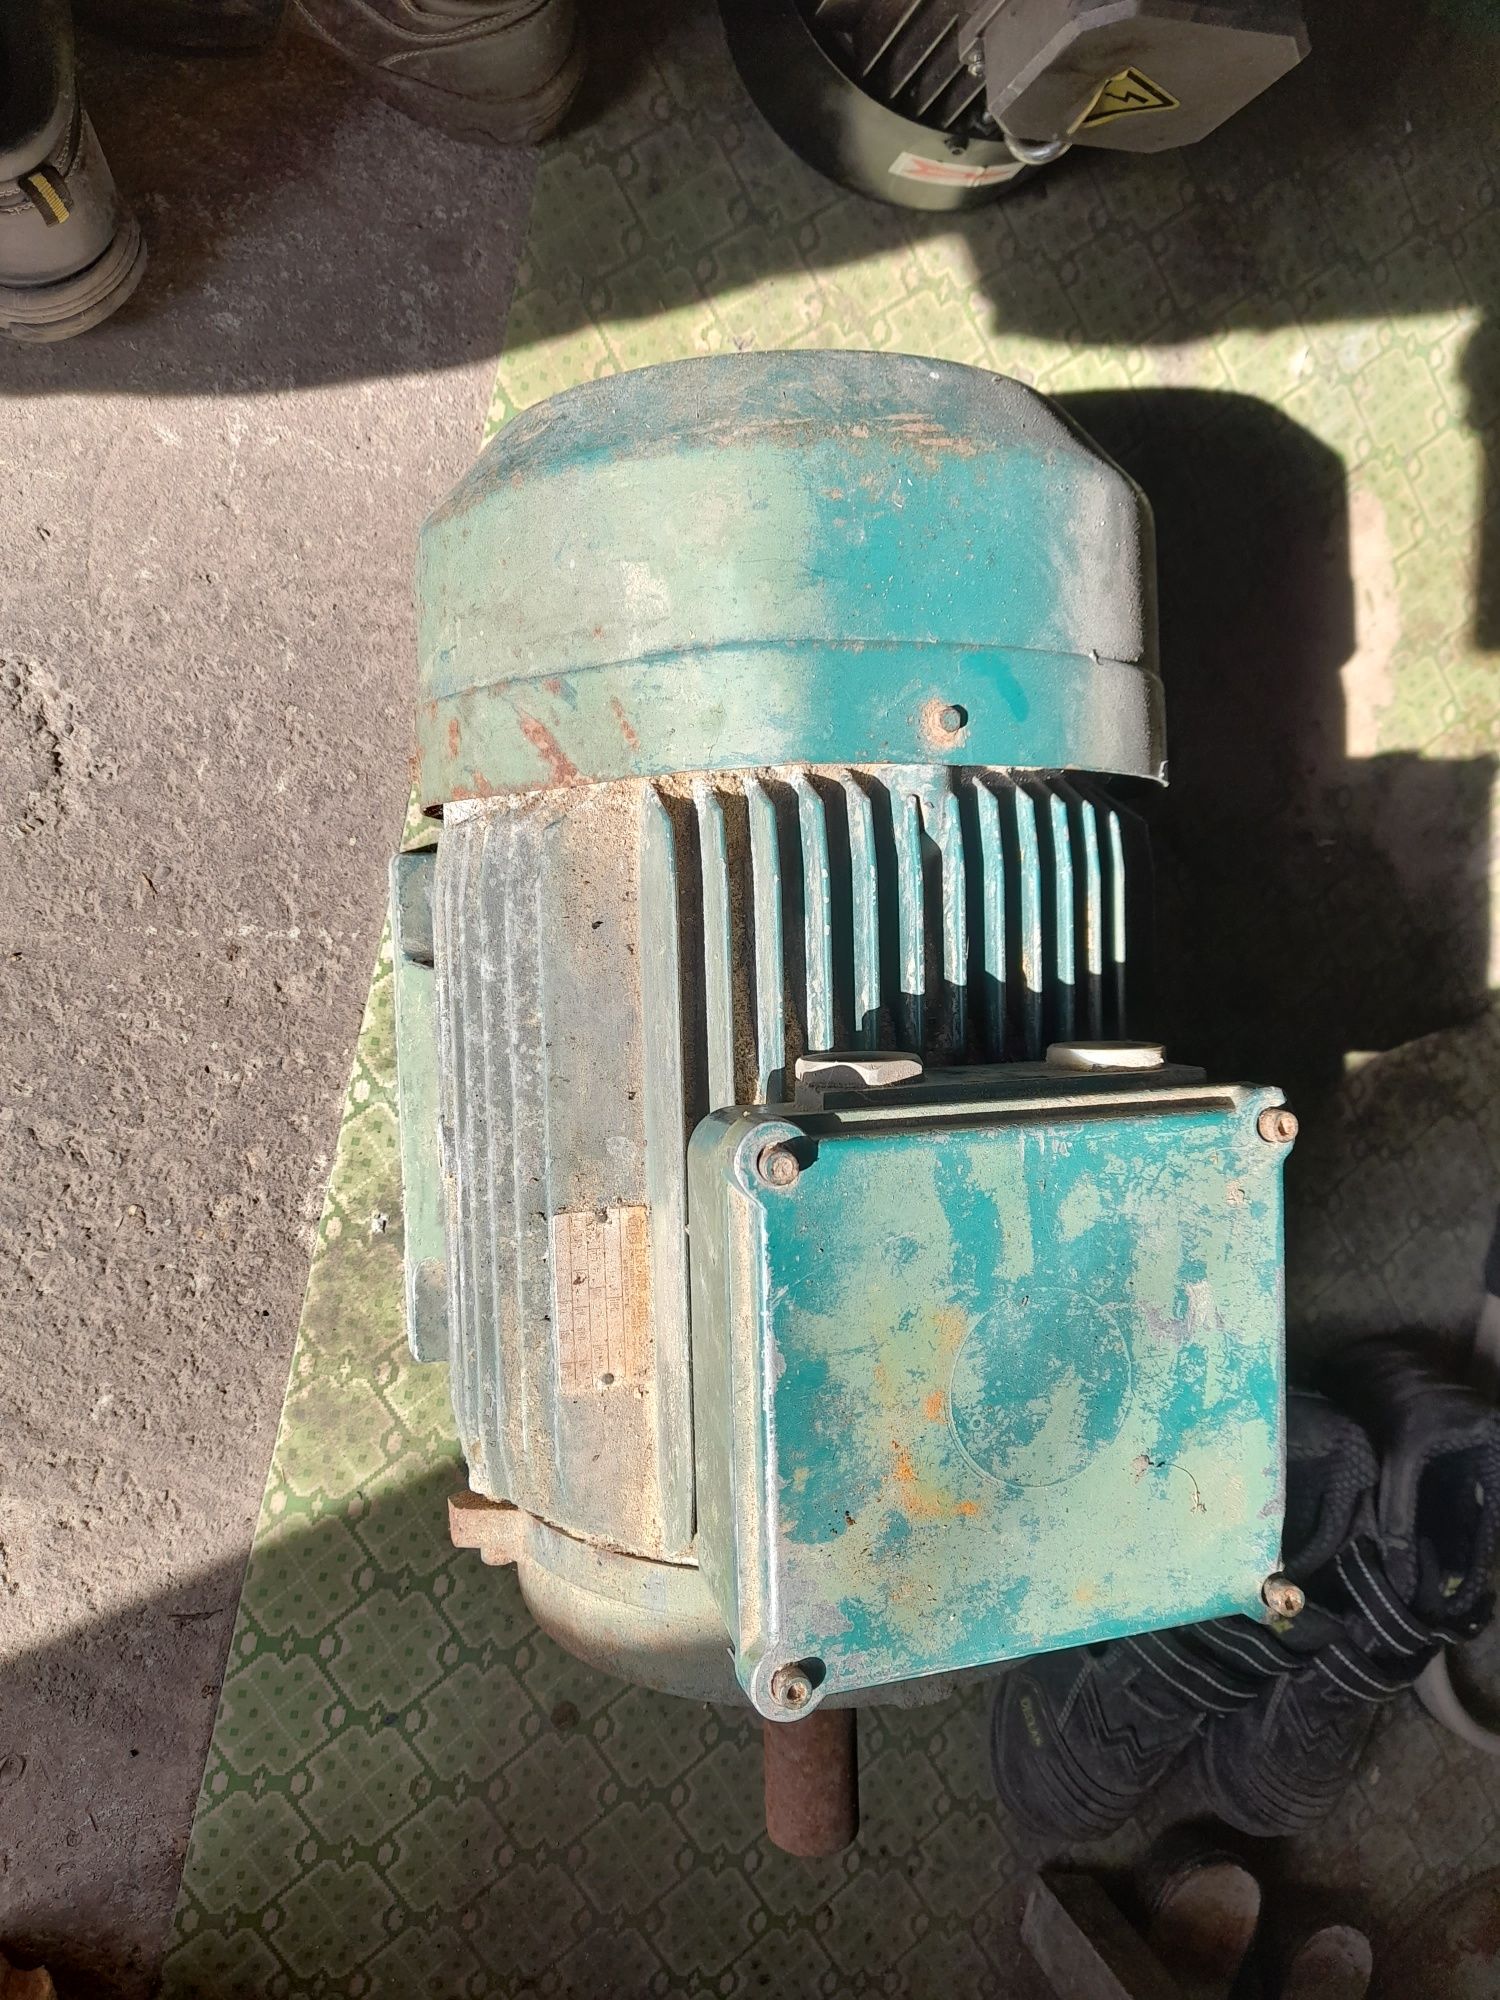 Motor electric 11kw/2800 rot 380v